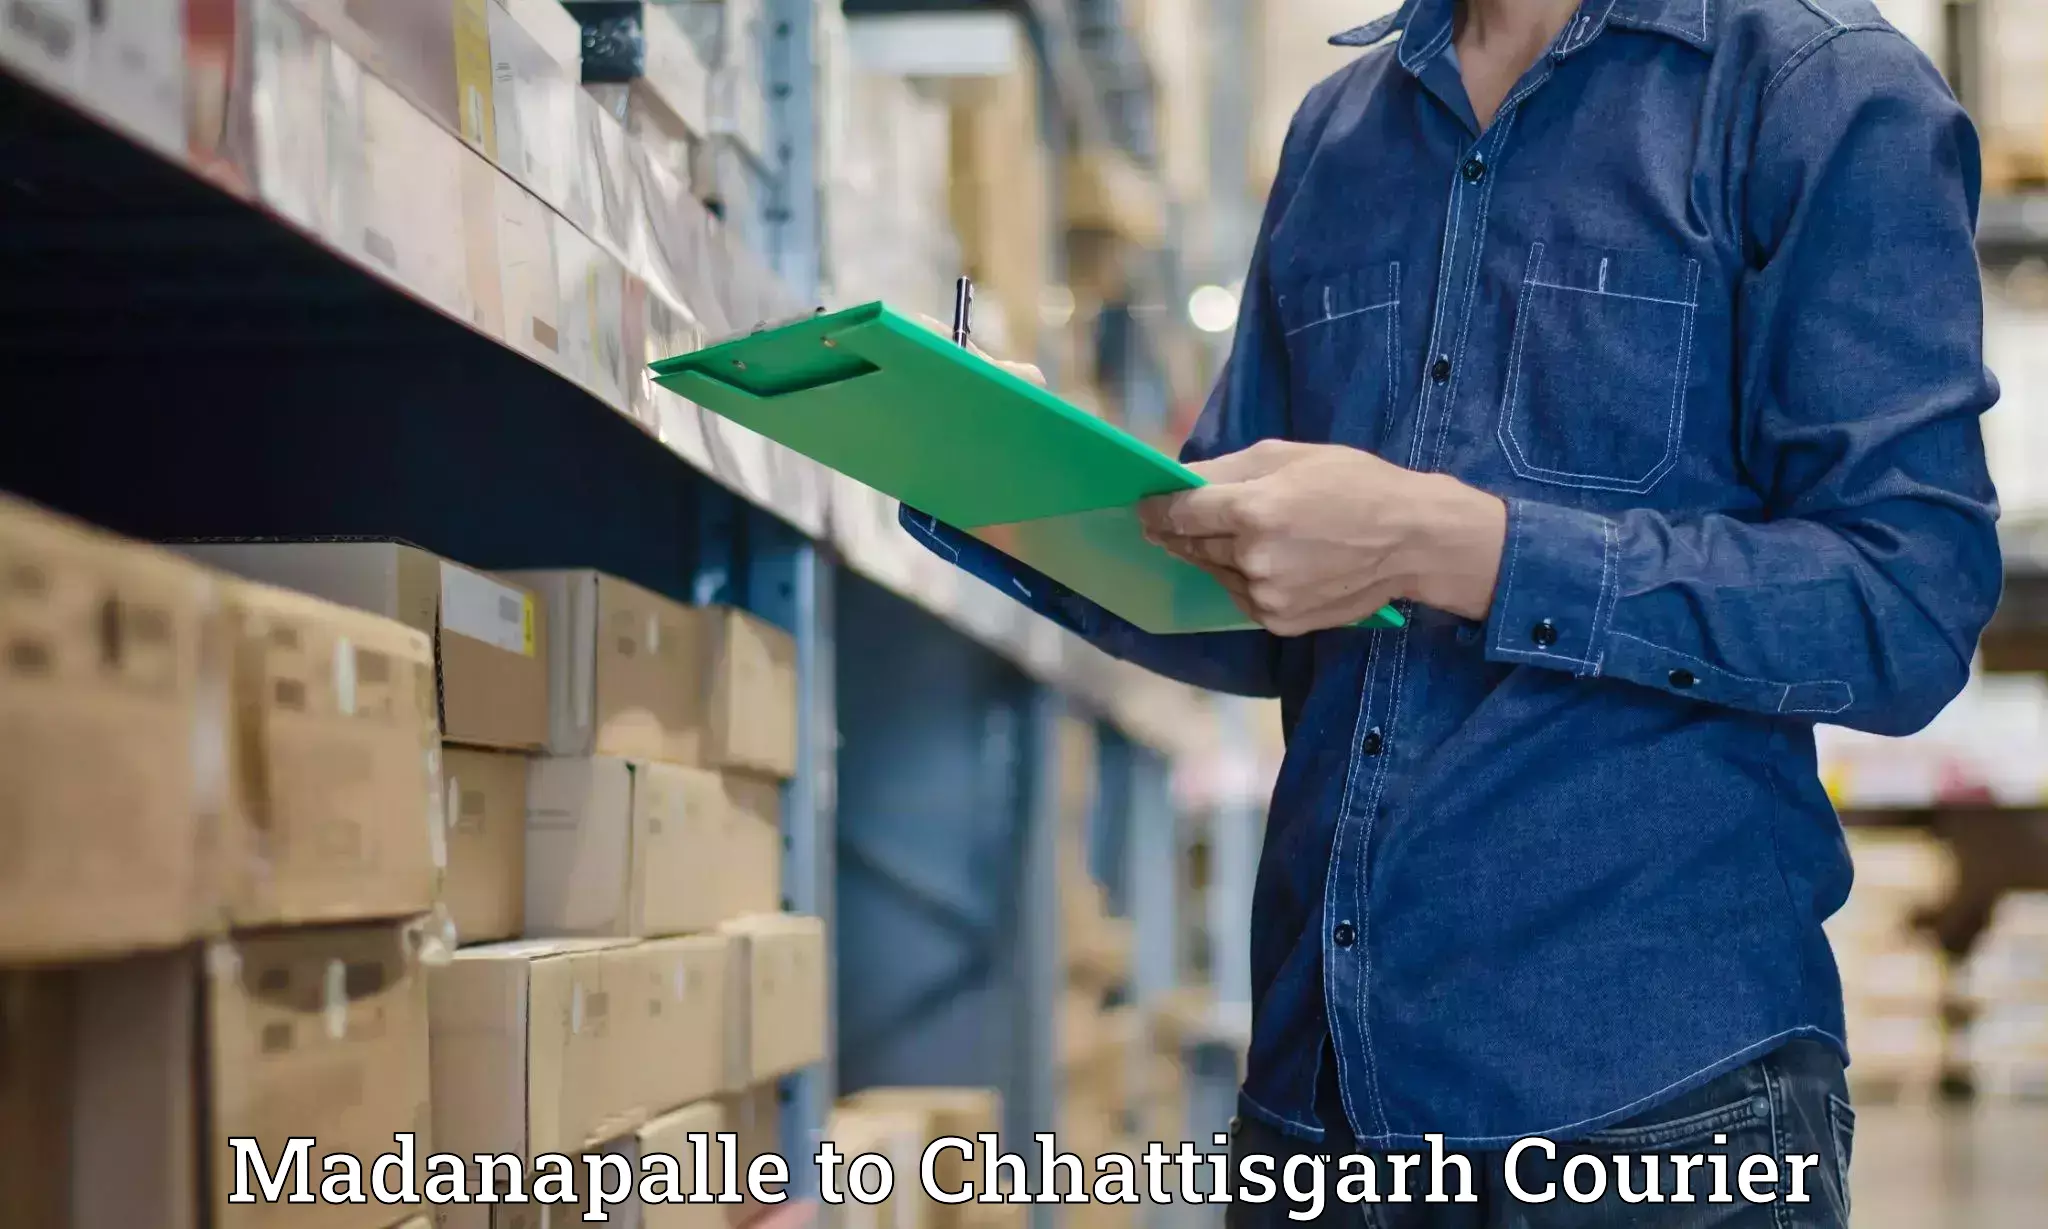 On-call courier service Madanapalle to Raigarh